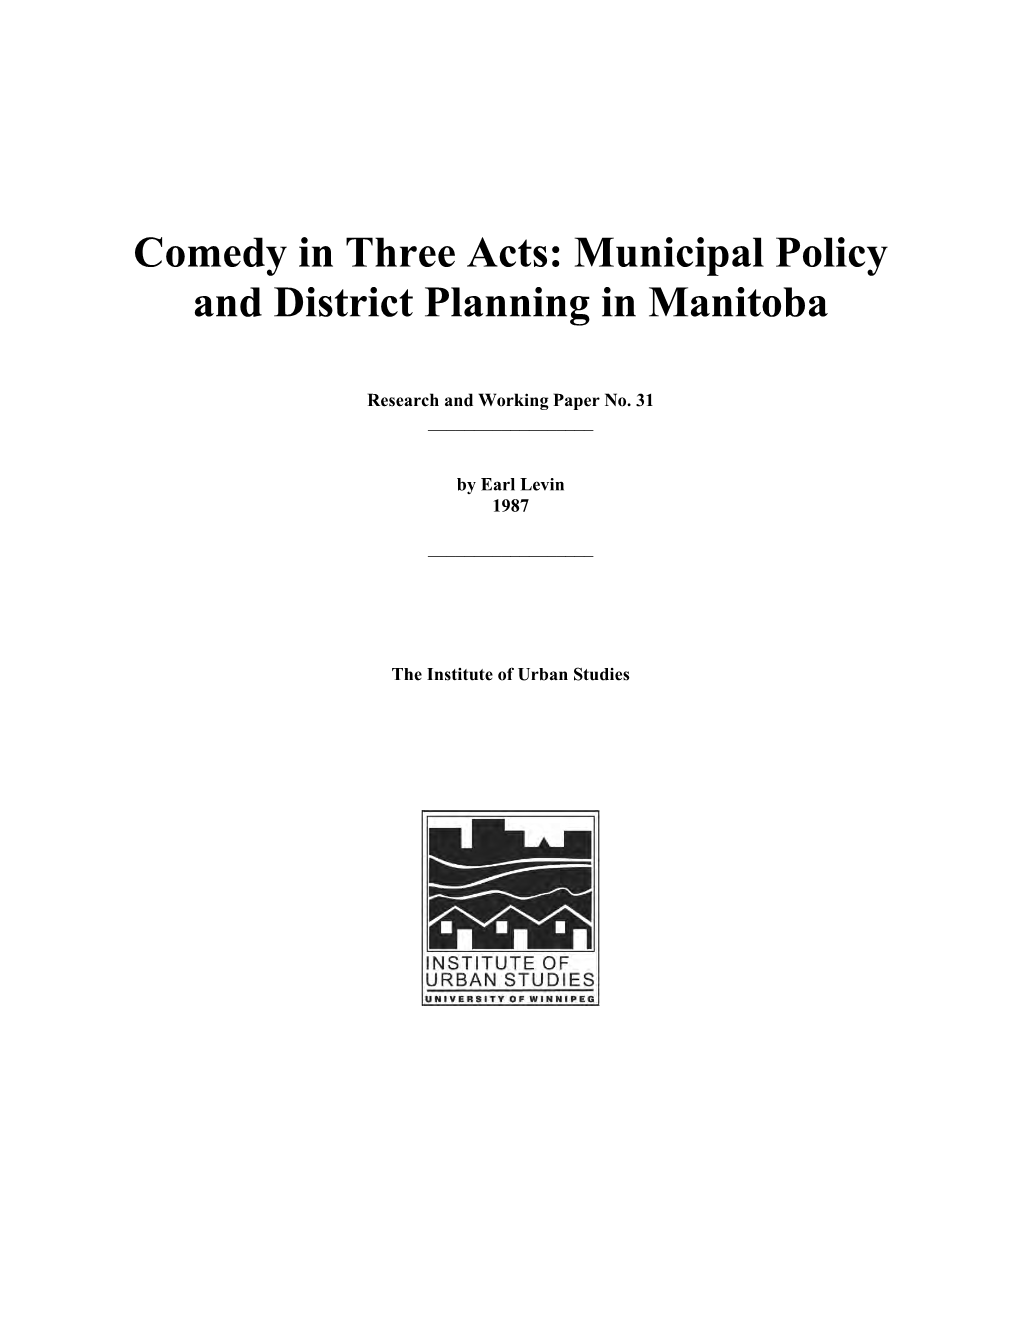 Municipal Policy and District Planning in Manitoba